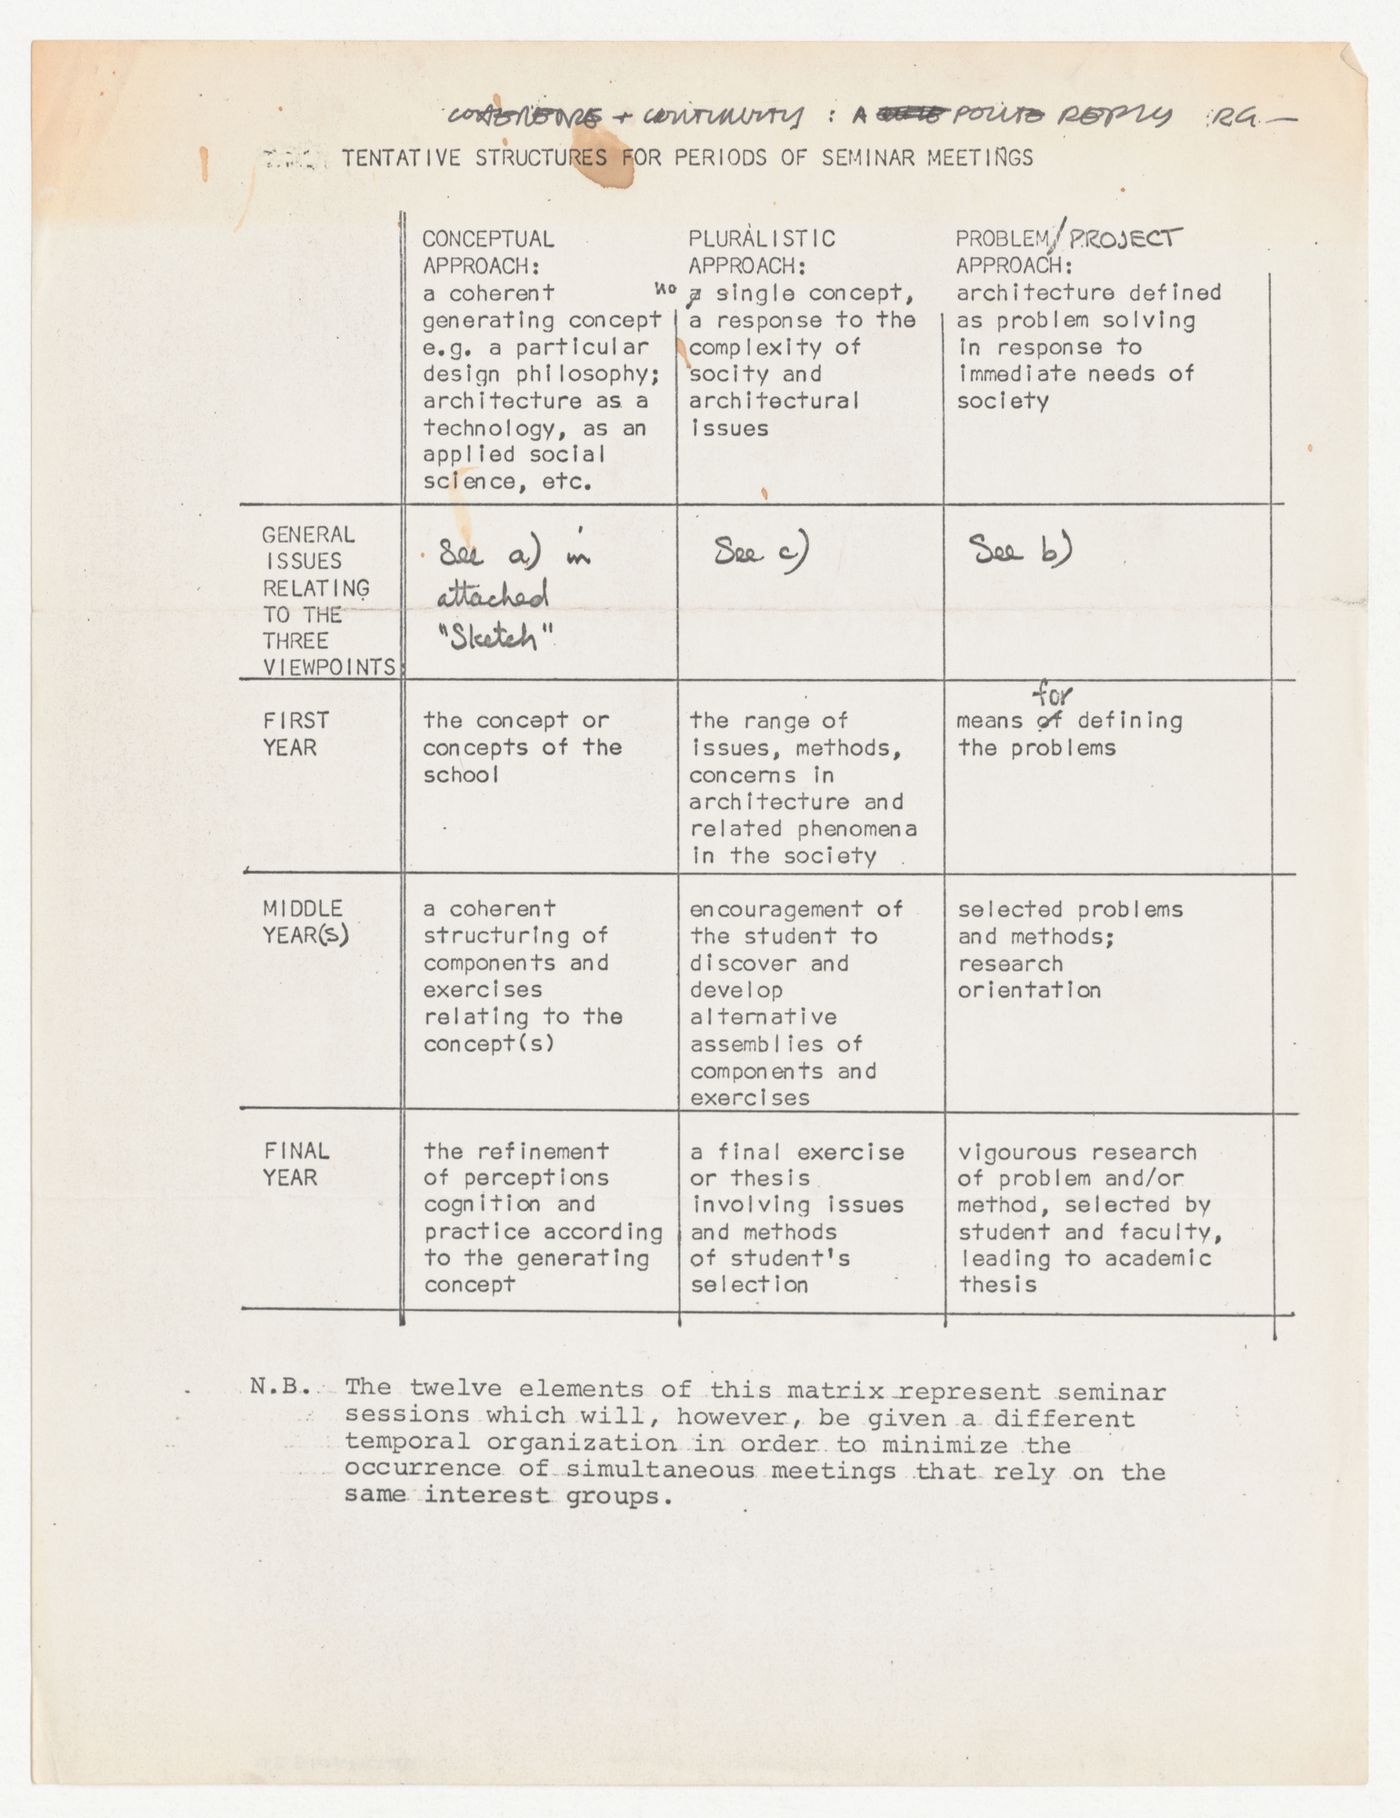 Tentative structures for periods of seminar meetings for the Annual Northeast Regional Conference of the Association of Collegiate Schools of Architecture with annotations by Peter D. Eisenman